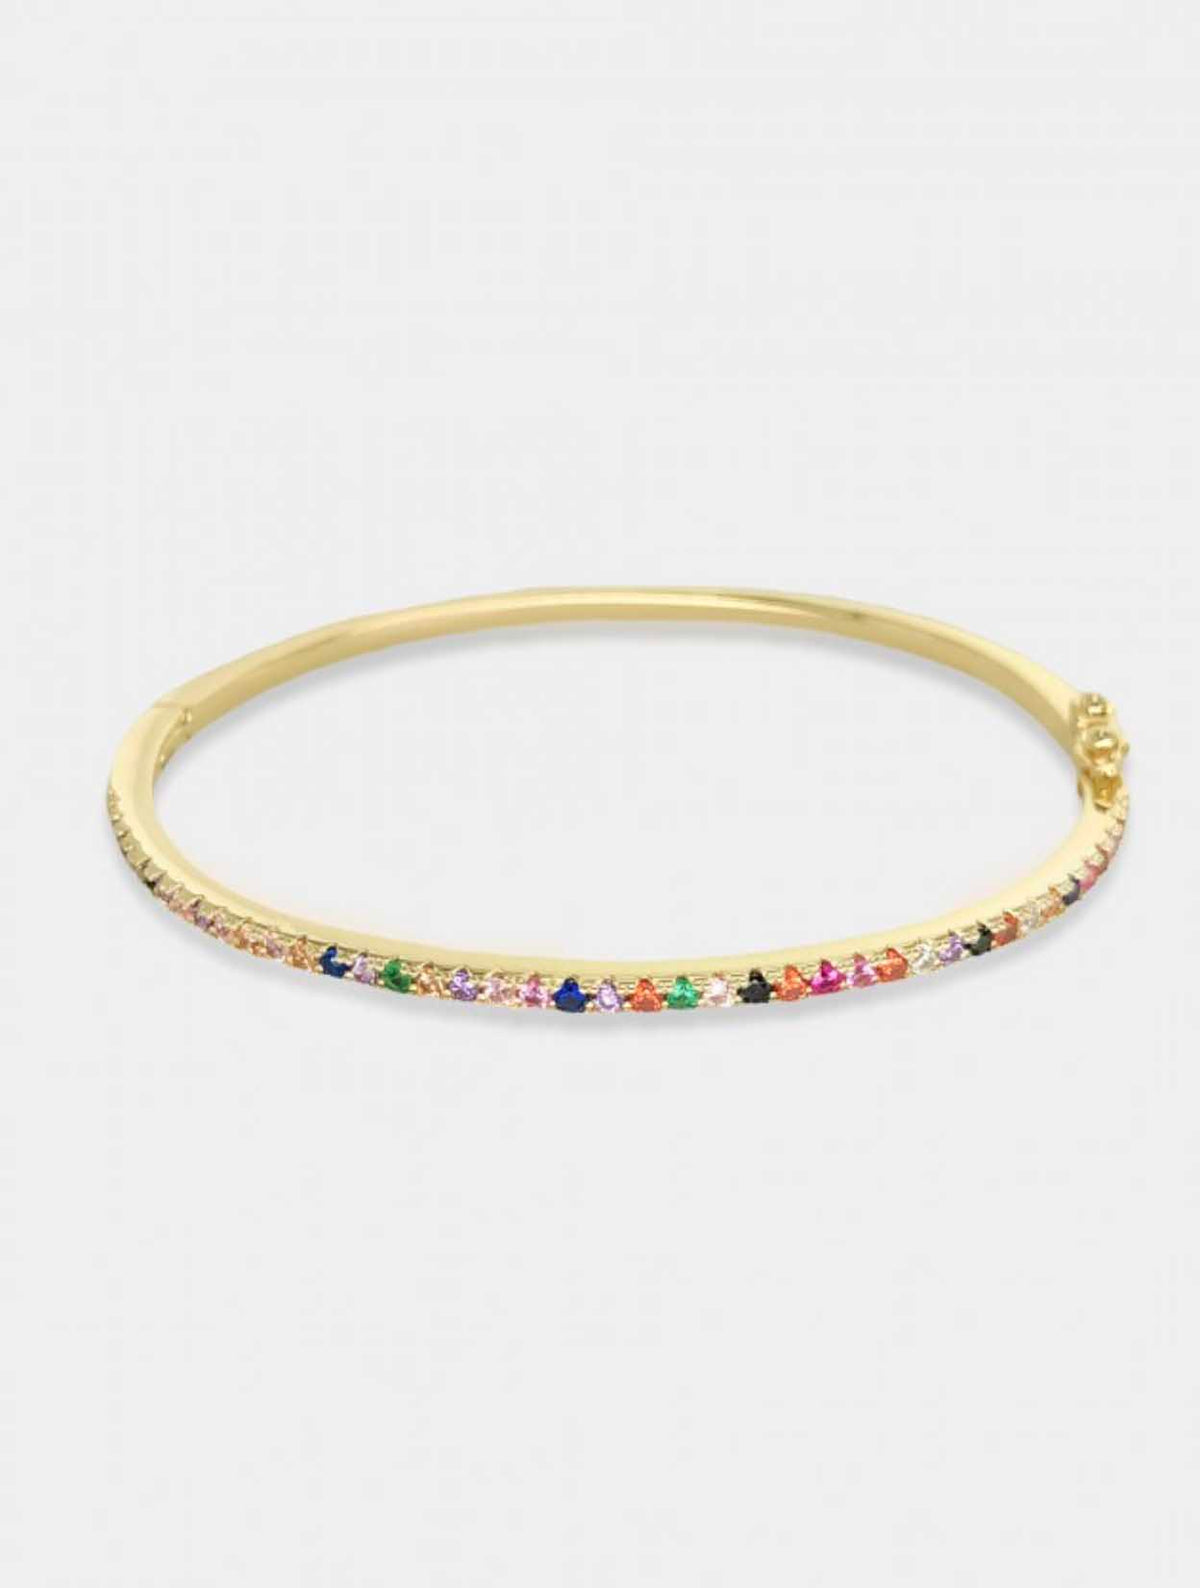 6776993480779-JAYNE-Gold-Bangle-with-Multi-Colored-Stones